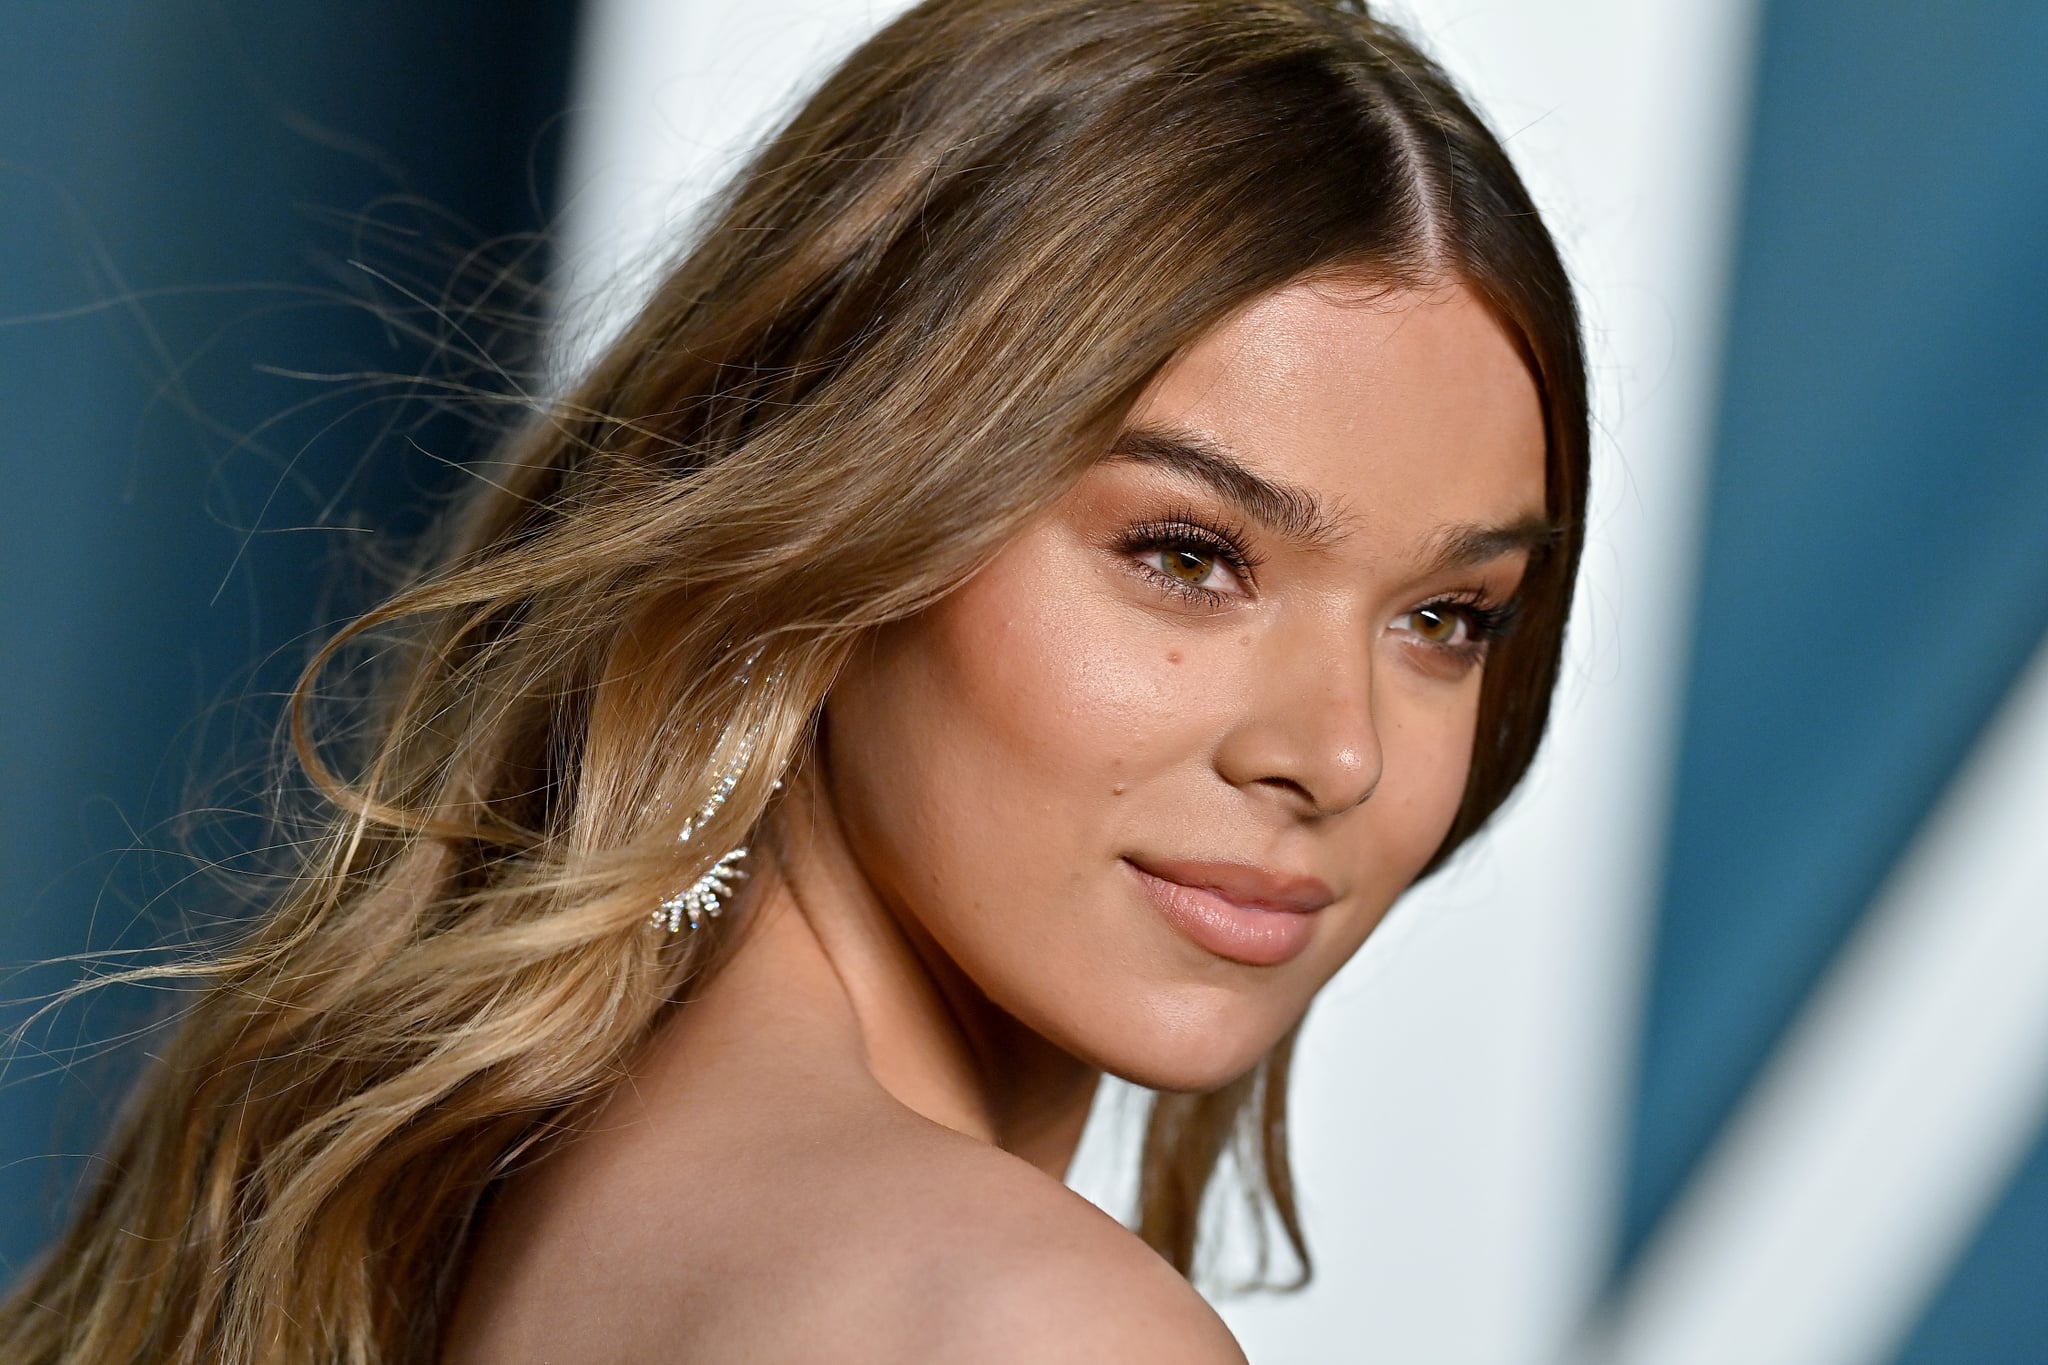 BEVERLY HILLS, CALIFORNIA - MARCH 27: Hailee Steinfeld attends the 2022 Vanity Fair Oscar Party hosted by Radhika Jones at Wallis Annenberg Center for the Performing Arts on March 27, 2022 in Beverly Hills, California. (Photo by Axelle/Bauer-Griffin/FilmMagic)